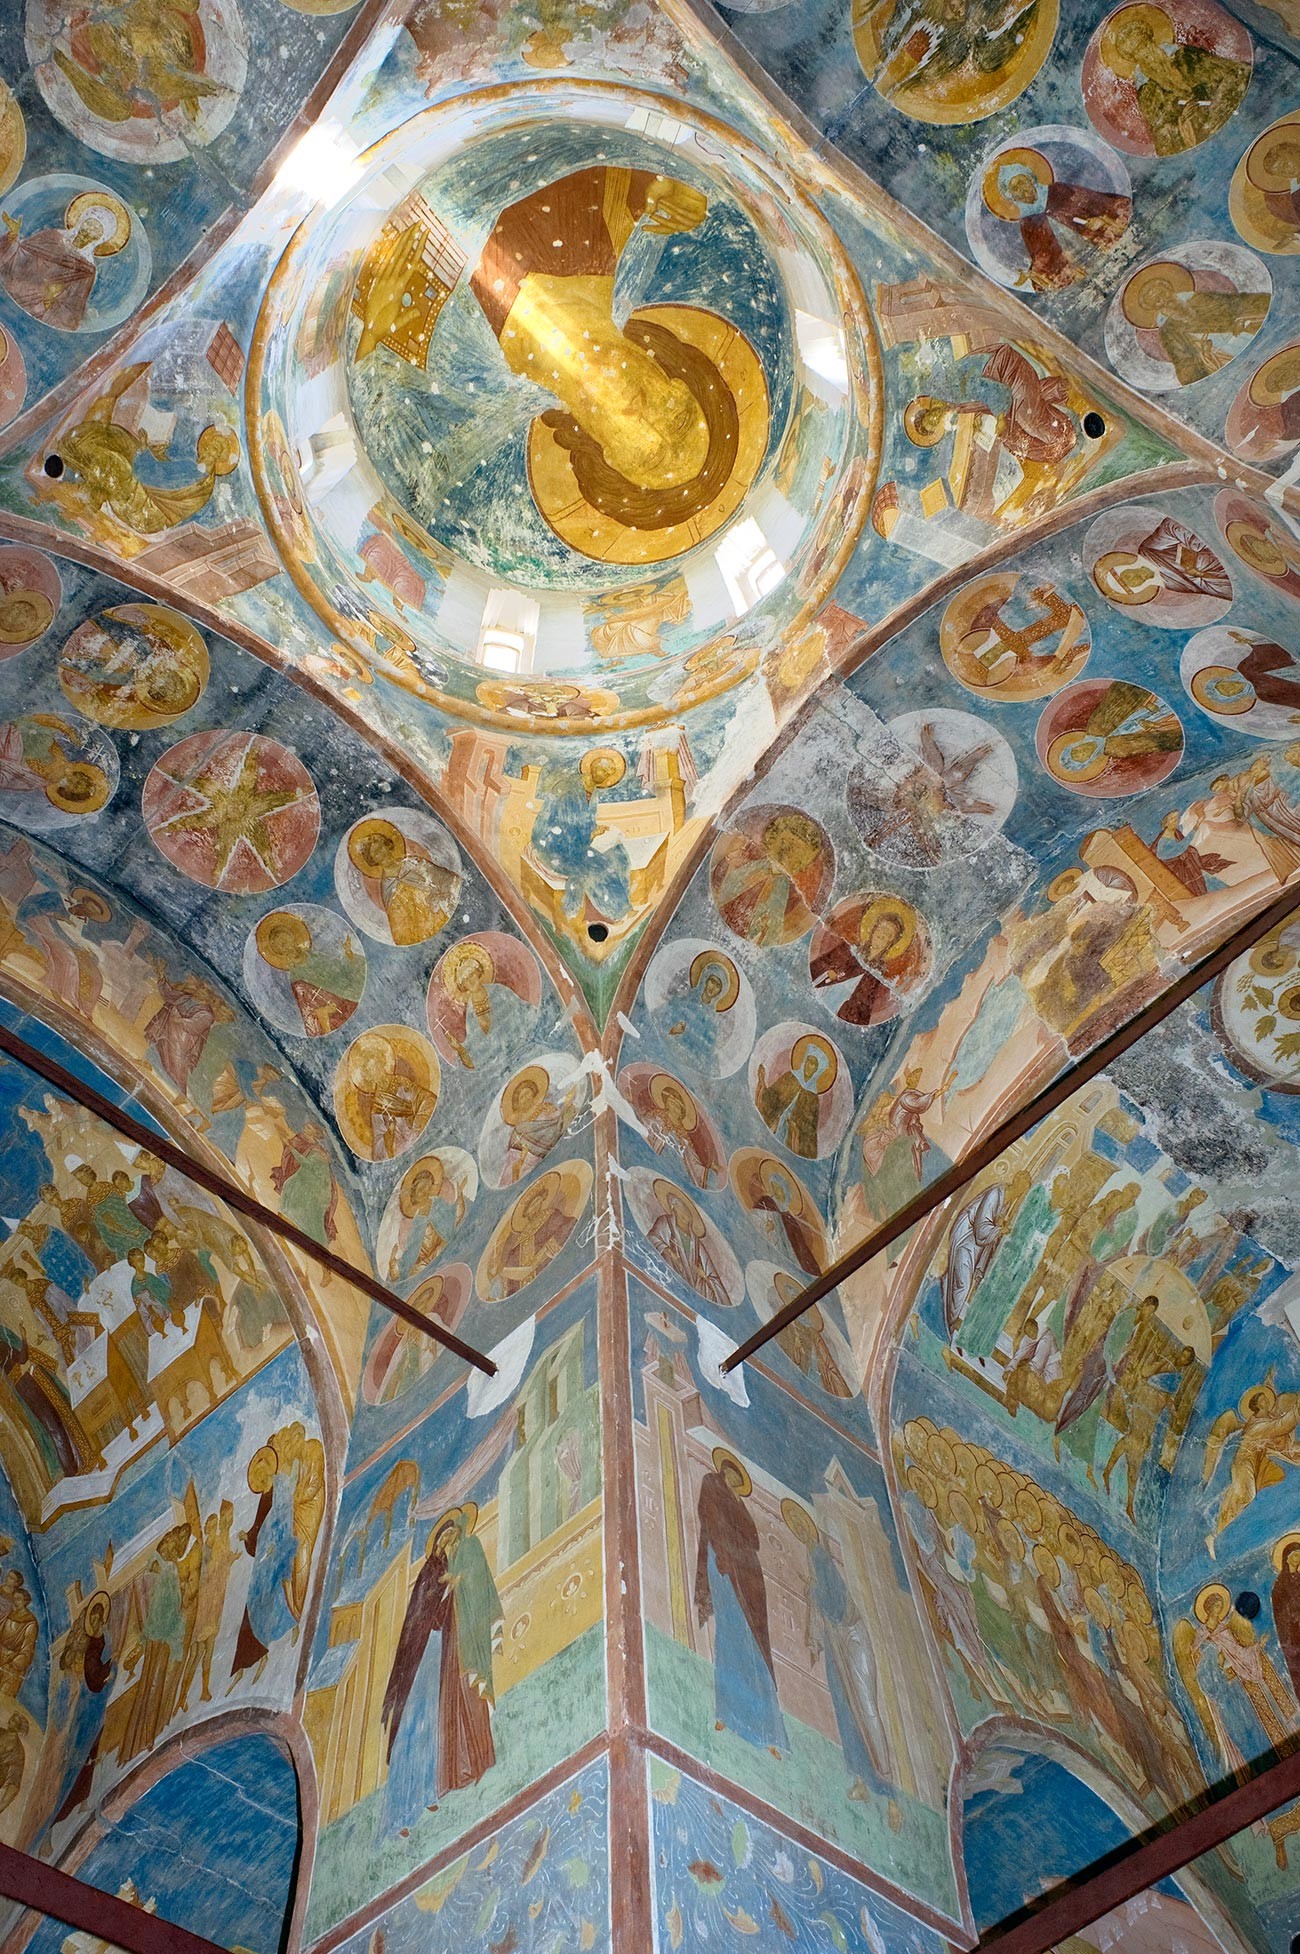 Cathedral of Nativity. Dome with image of Christ Pantokrator. Left: southwest pier with scenes from the Great Akathist (hymn to Virgin Mary). June 1, 2014